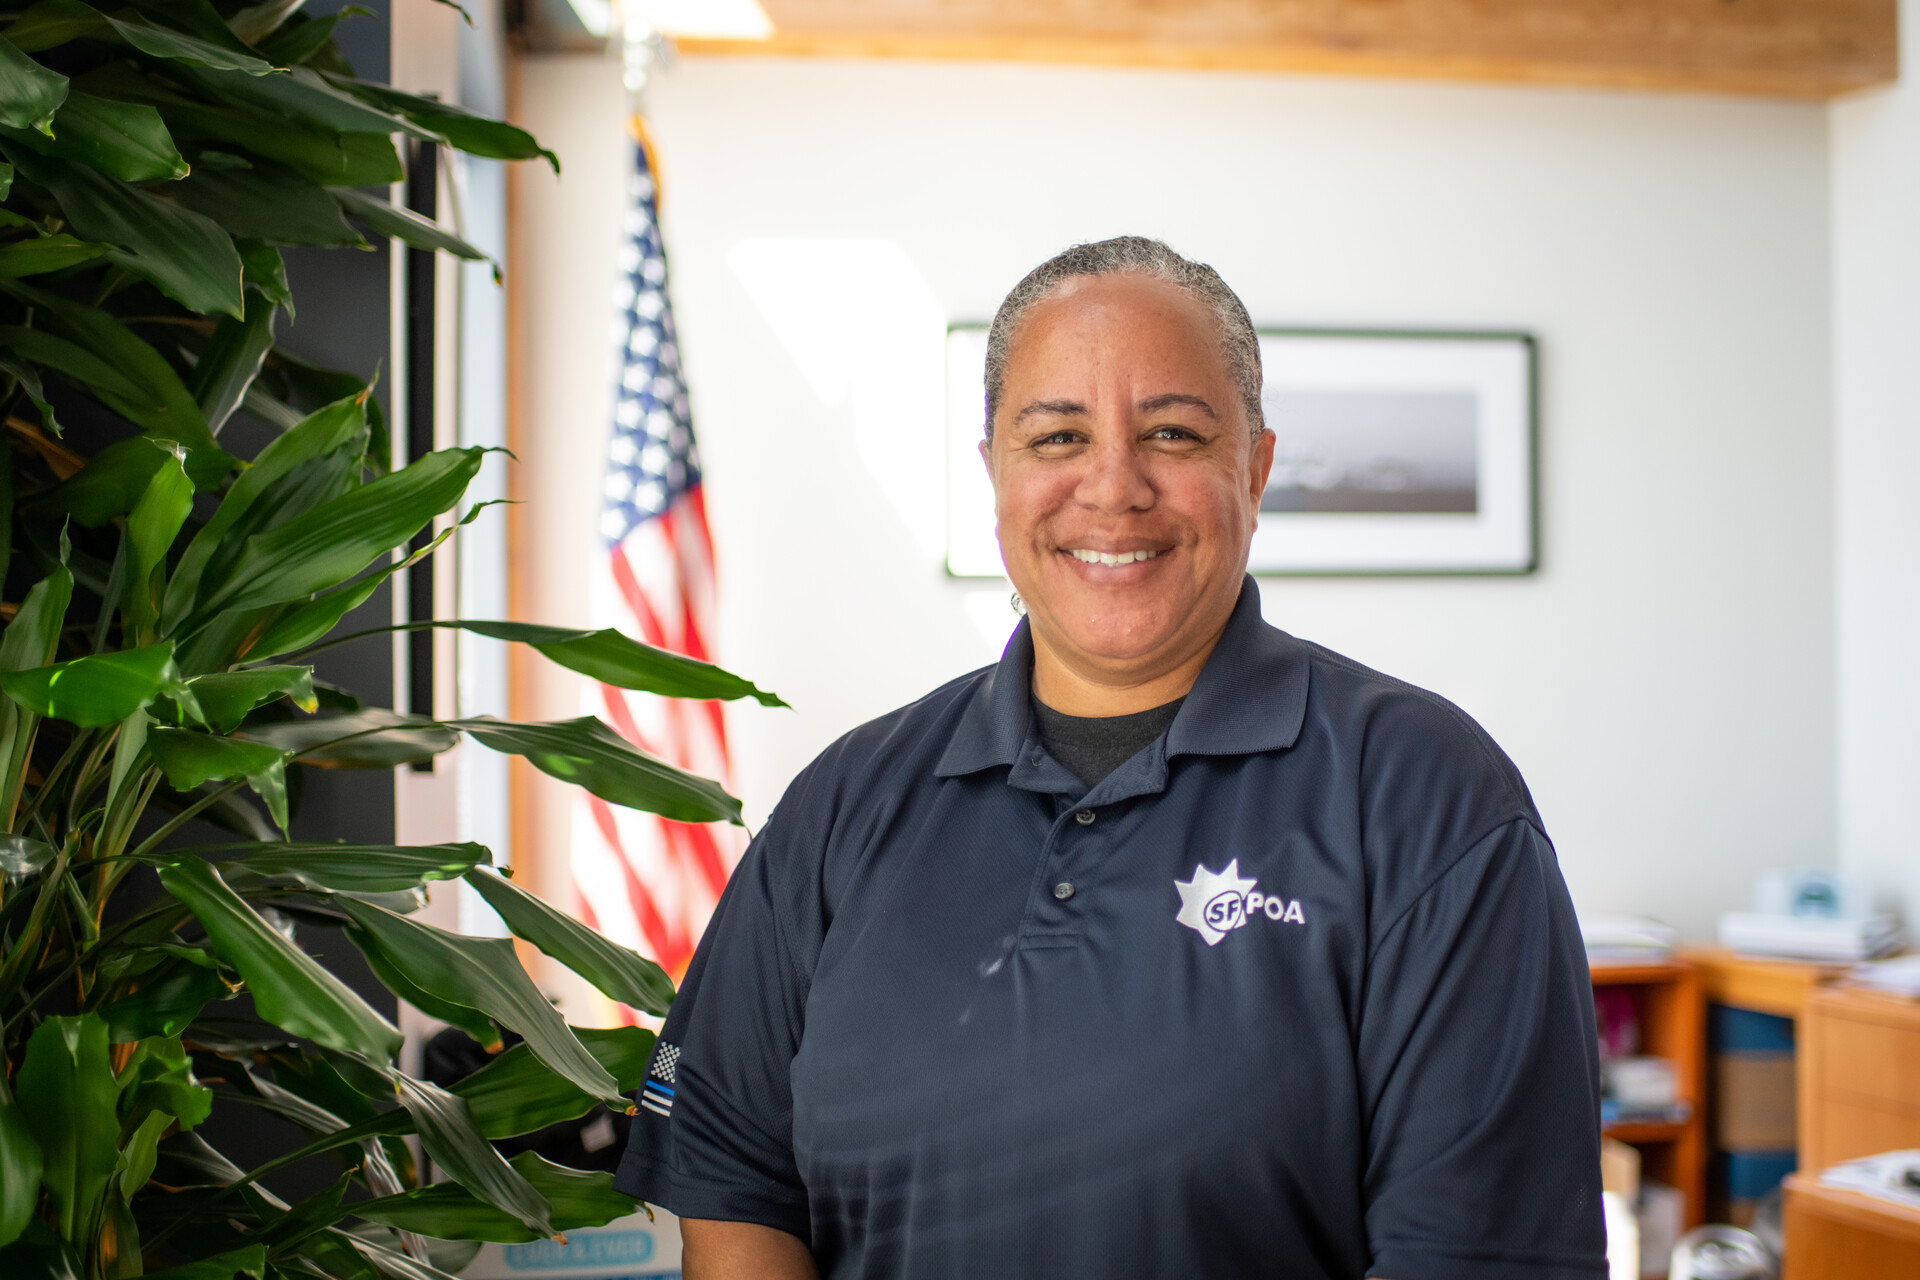 A Black woman smiles broadly, wearing a blue SFPOA shirt in an office with a US flag in the background